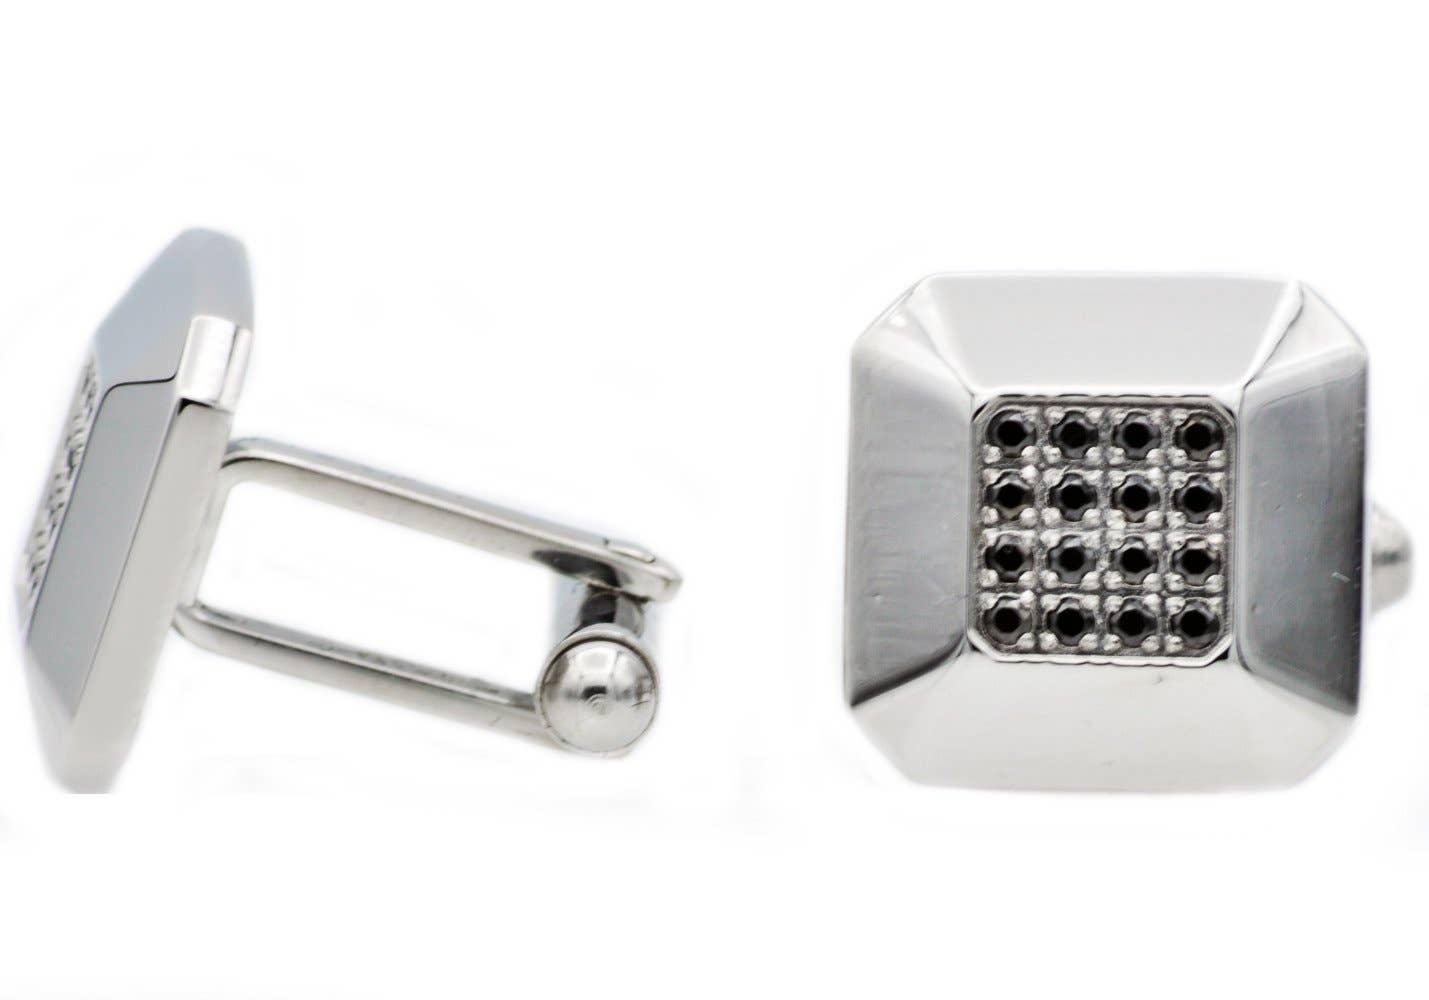 Blackjack Mens Jewelry - Men's Stainless Steel Cuff Links With Black Cubic Zirconia